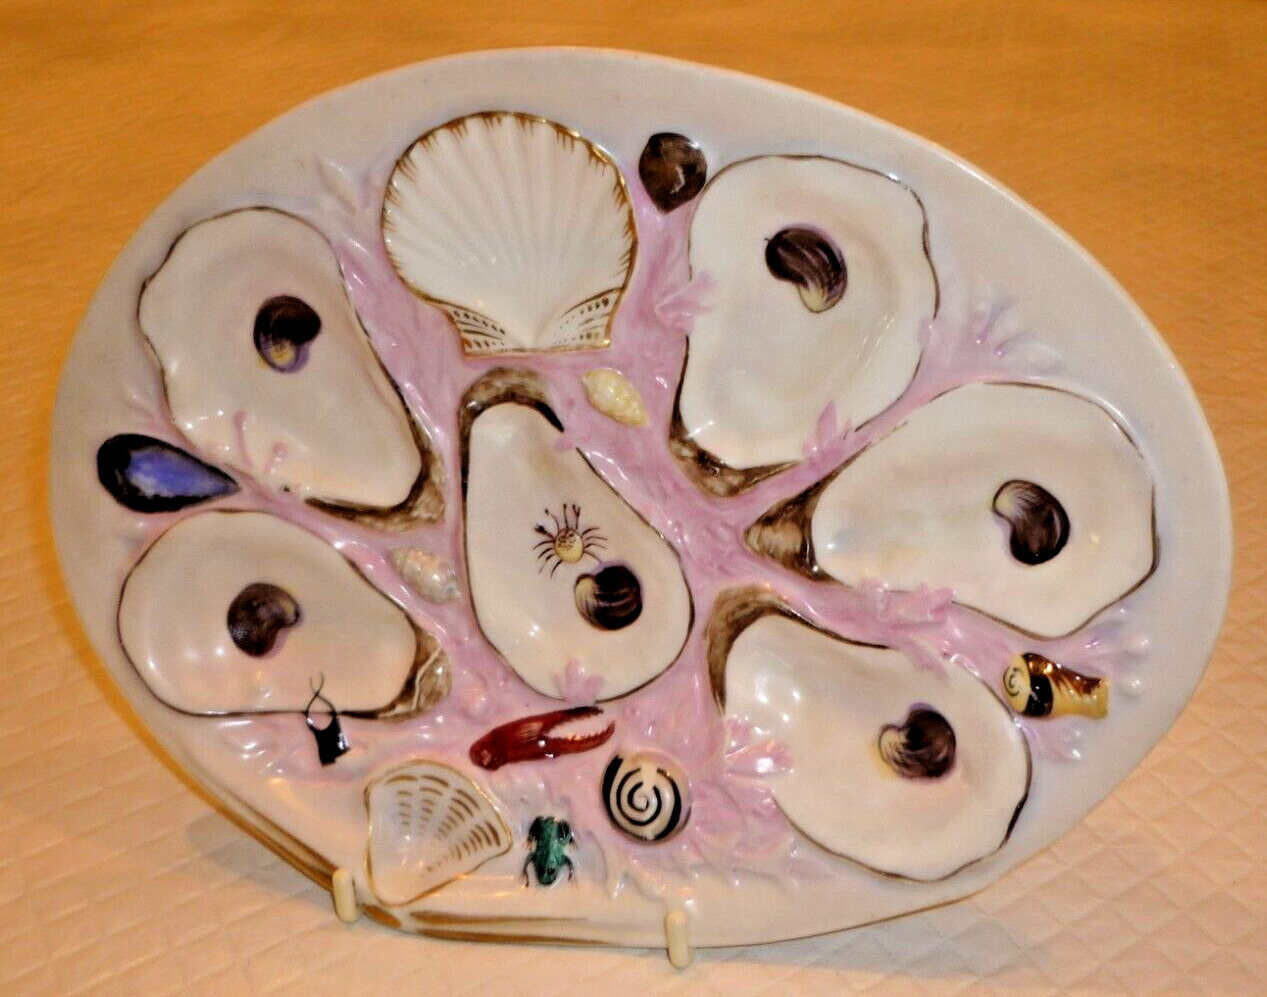 UNION PORCELAIN WORKS UPW LARGE CLAM SHAPE OYSTER PLATE WITH SEA LIFE